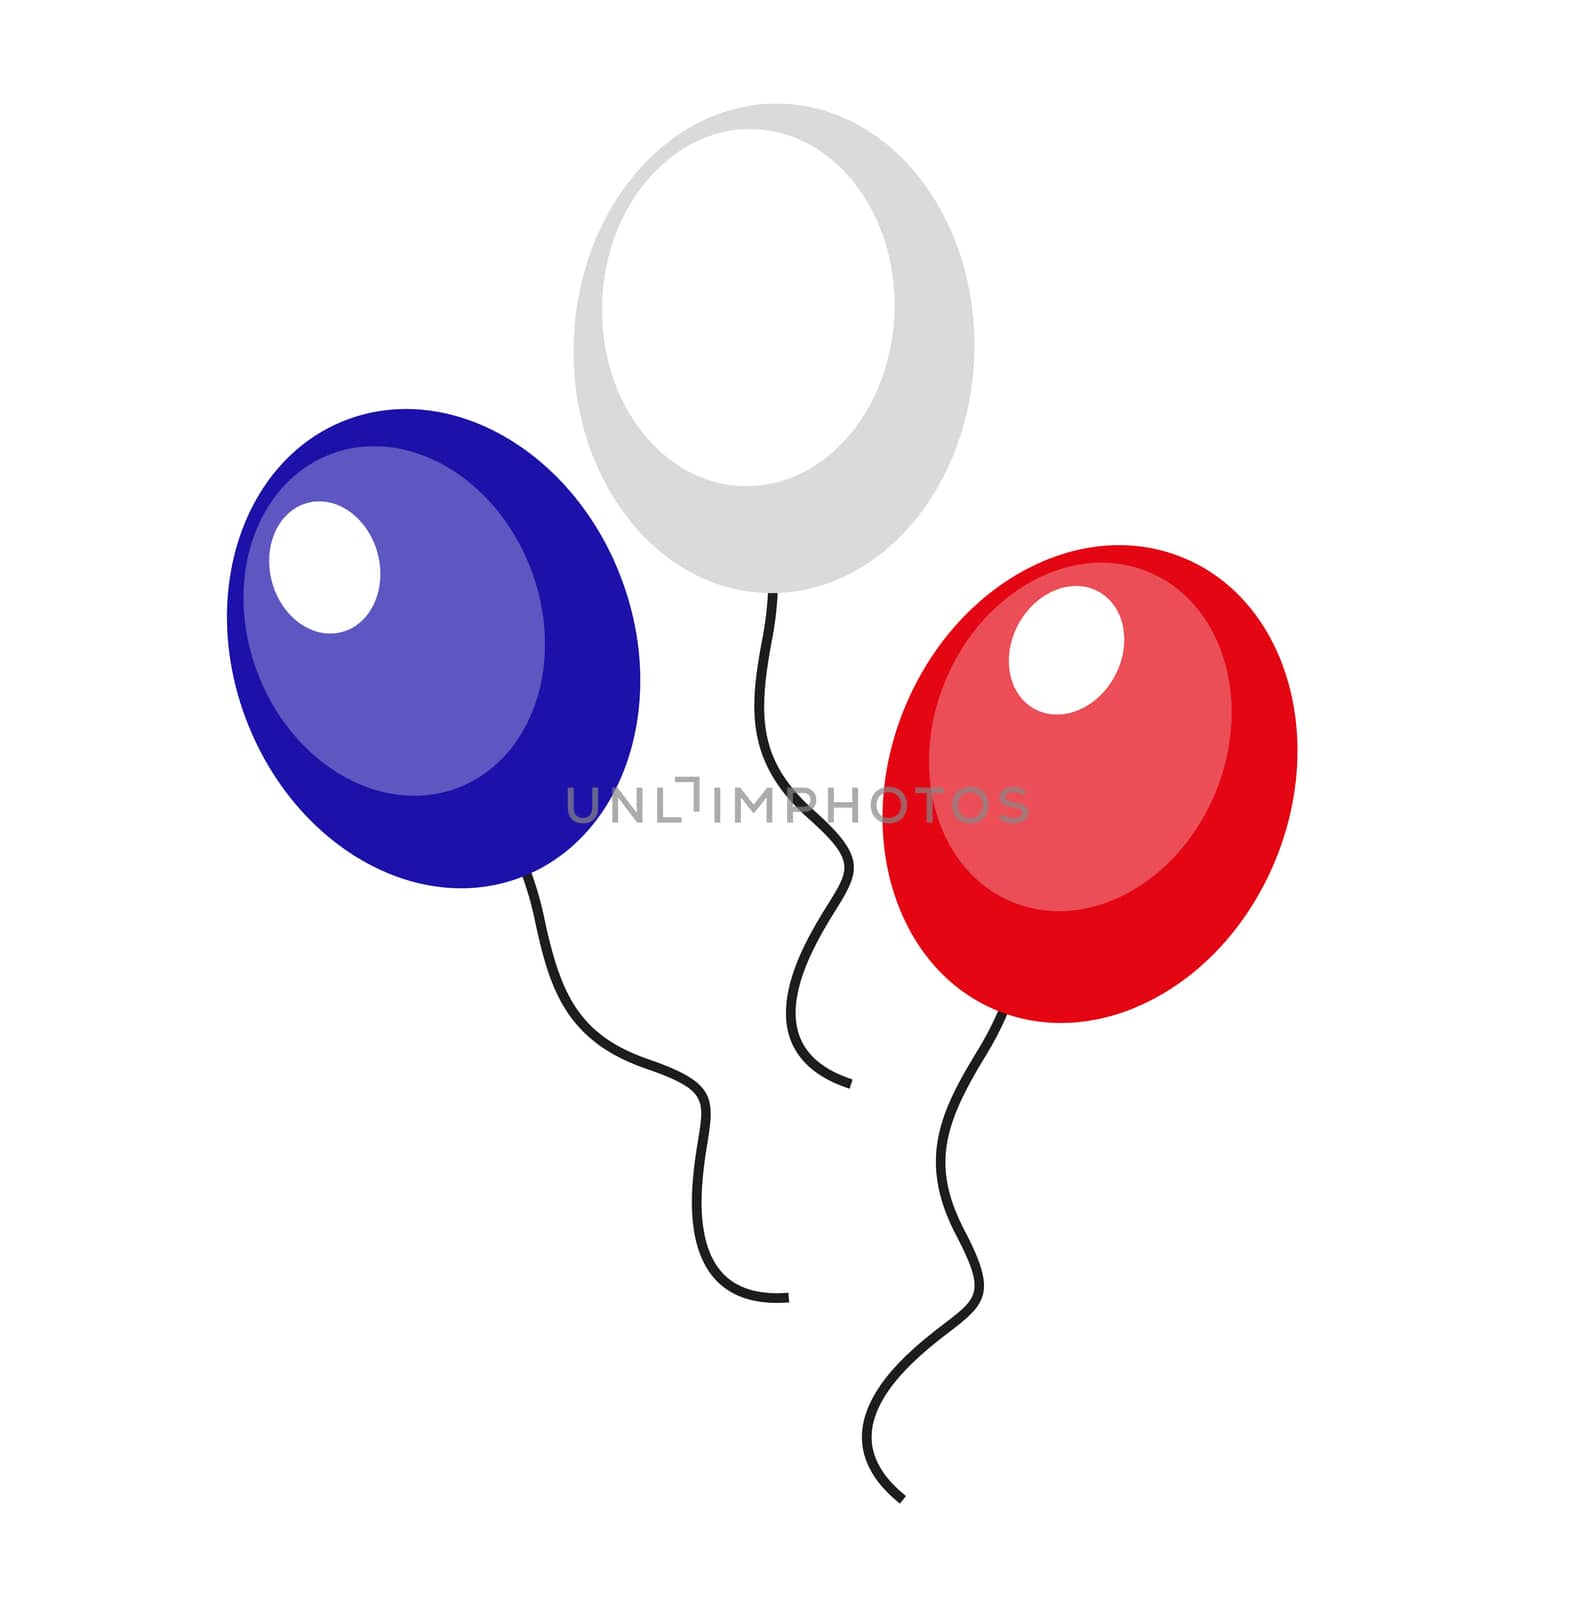 Balloons blue, red, white icon, flat style. 4th july concept. Isolated on white background. illustration